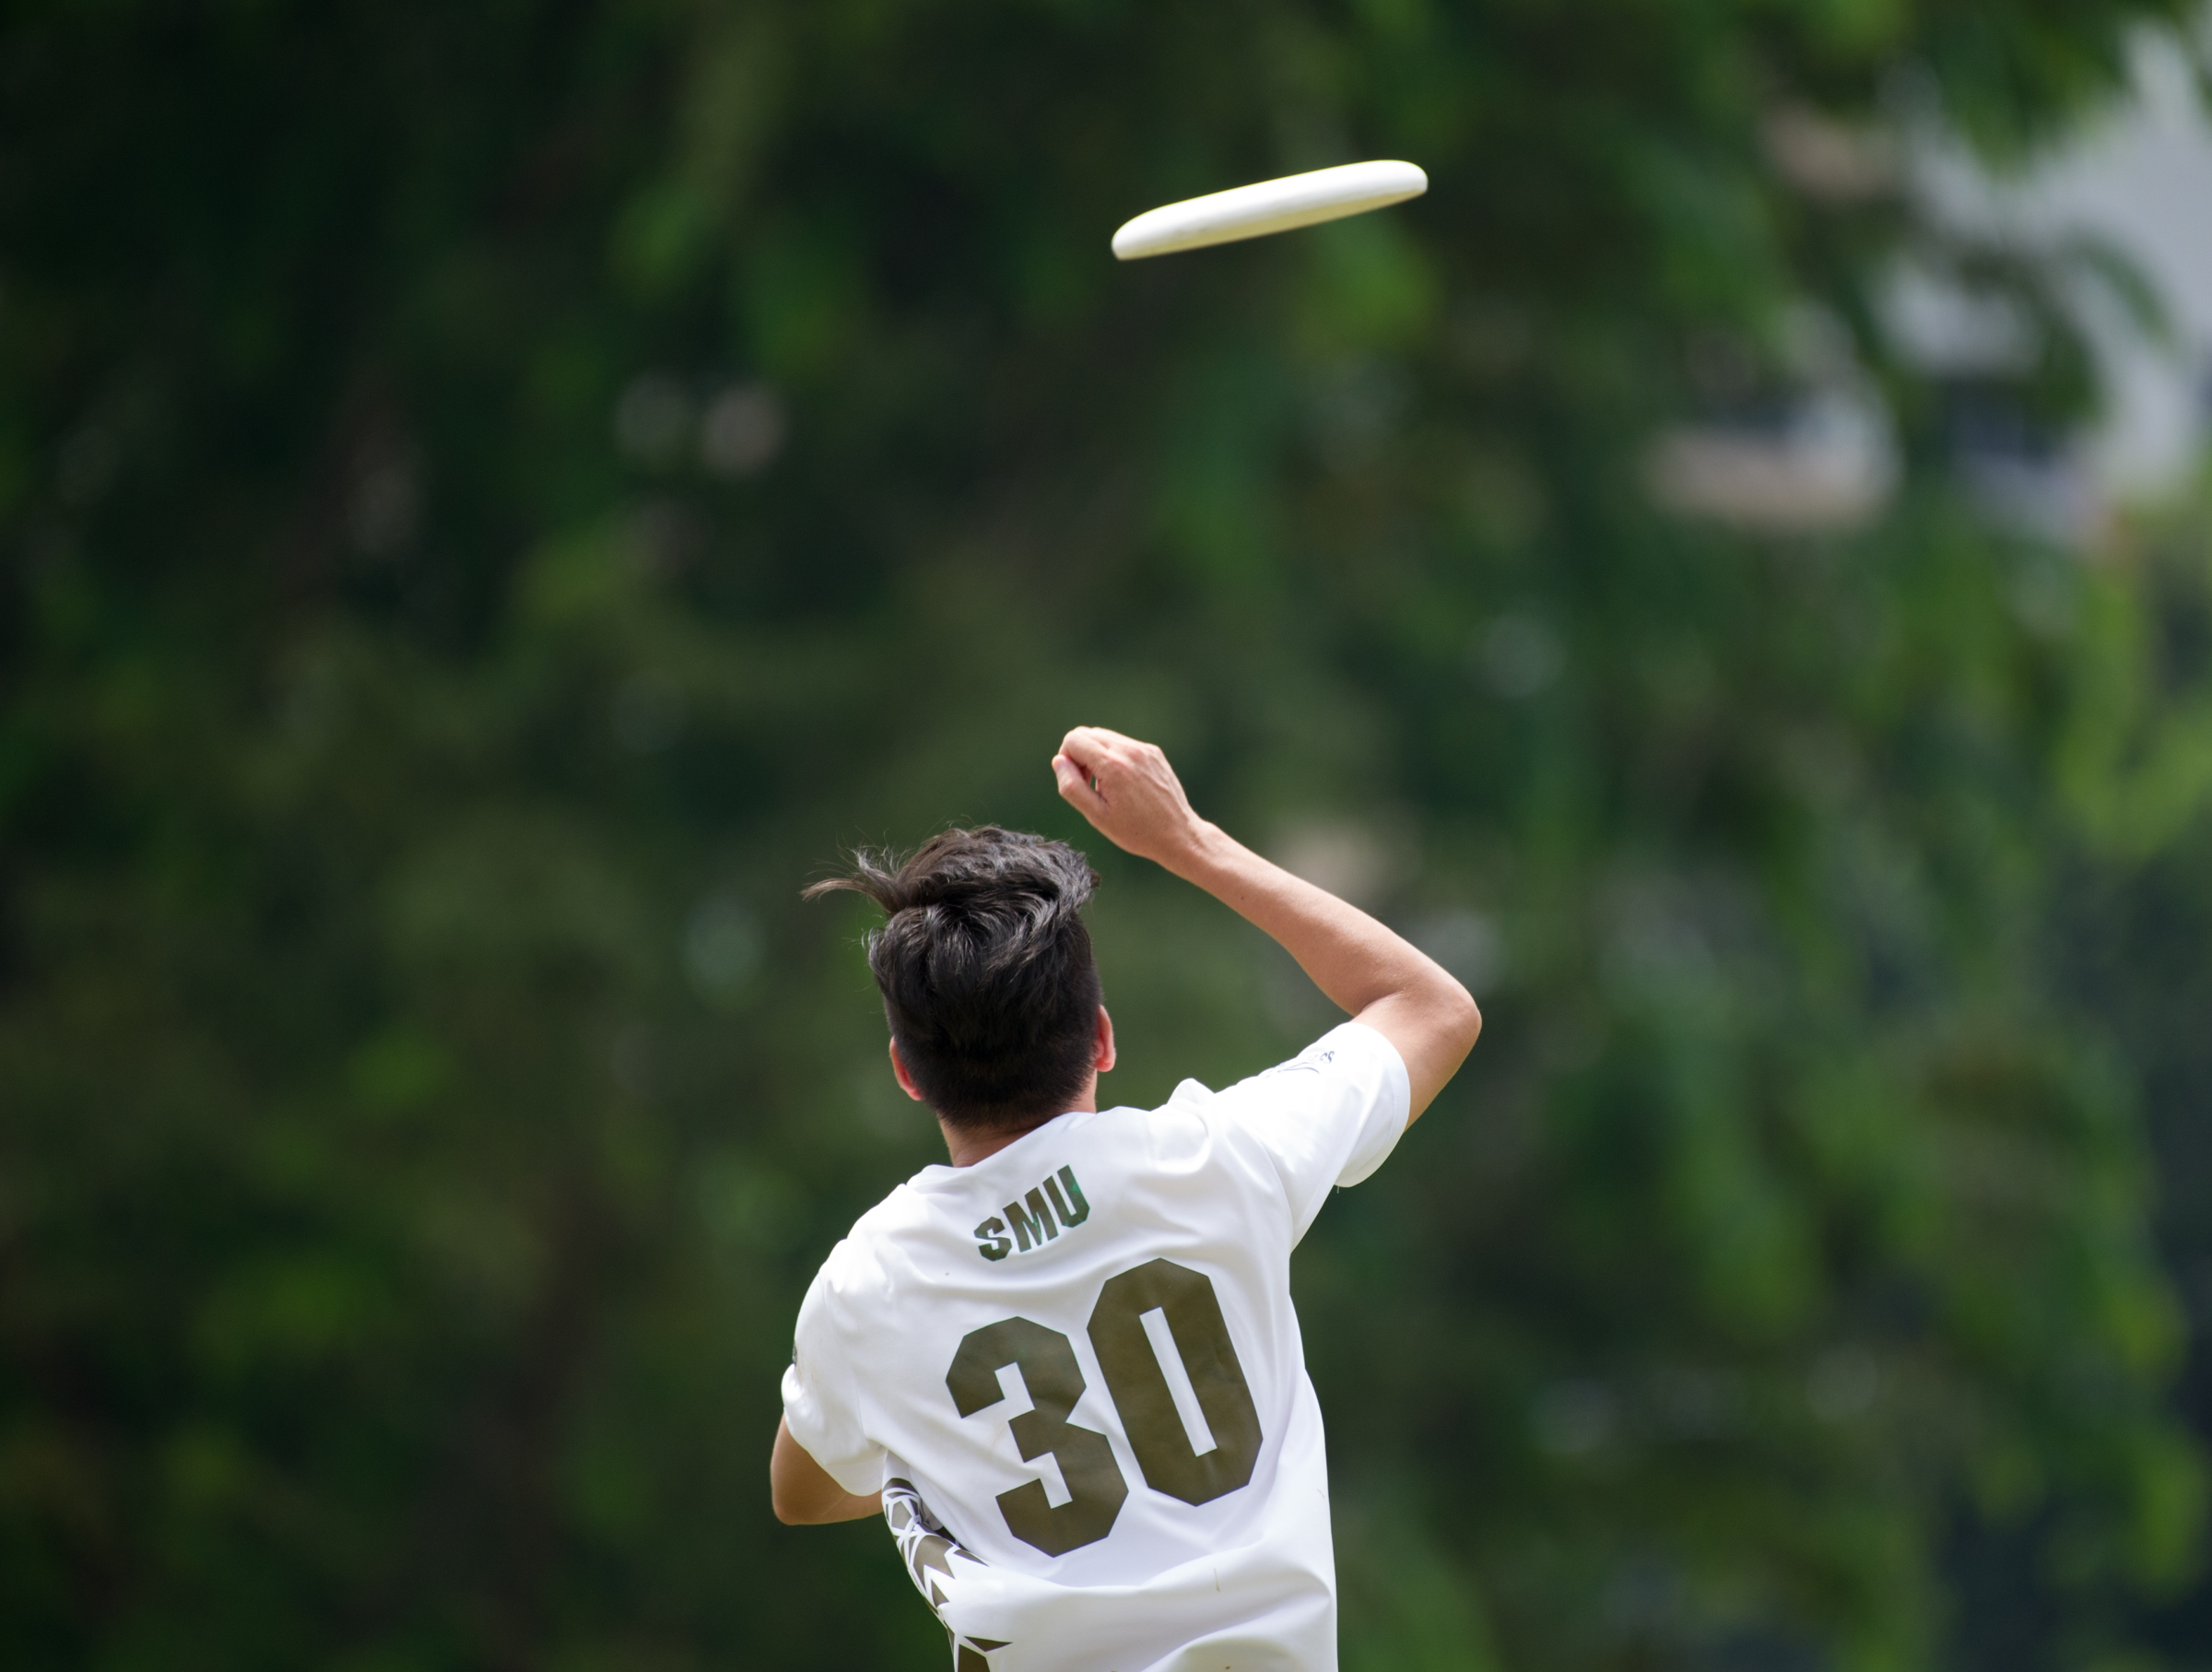 A player jumps to receive the frisbee during a friendly at Ang Mo Kio Central.